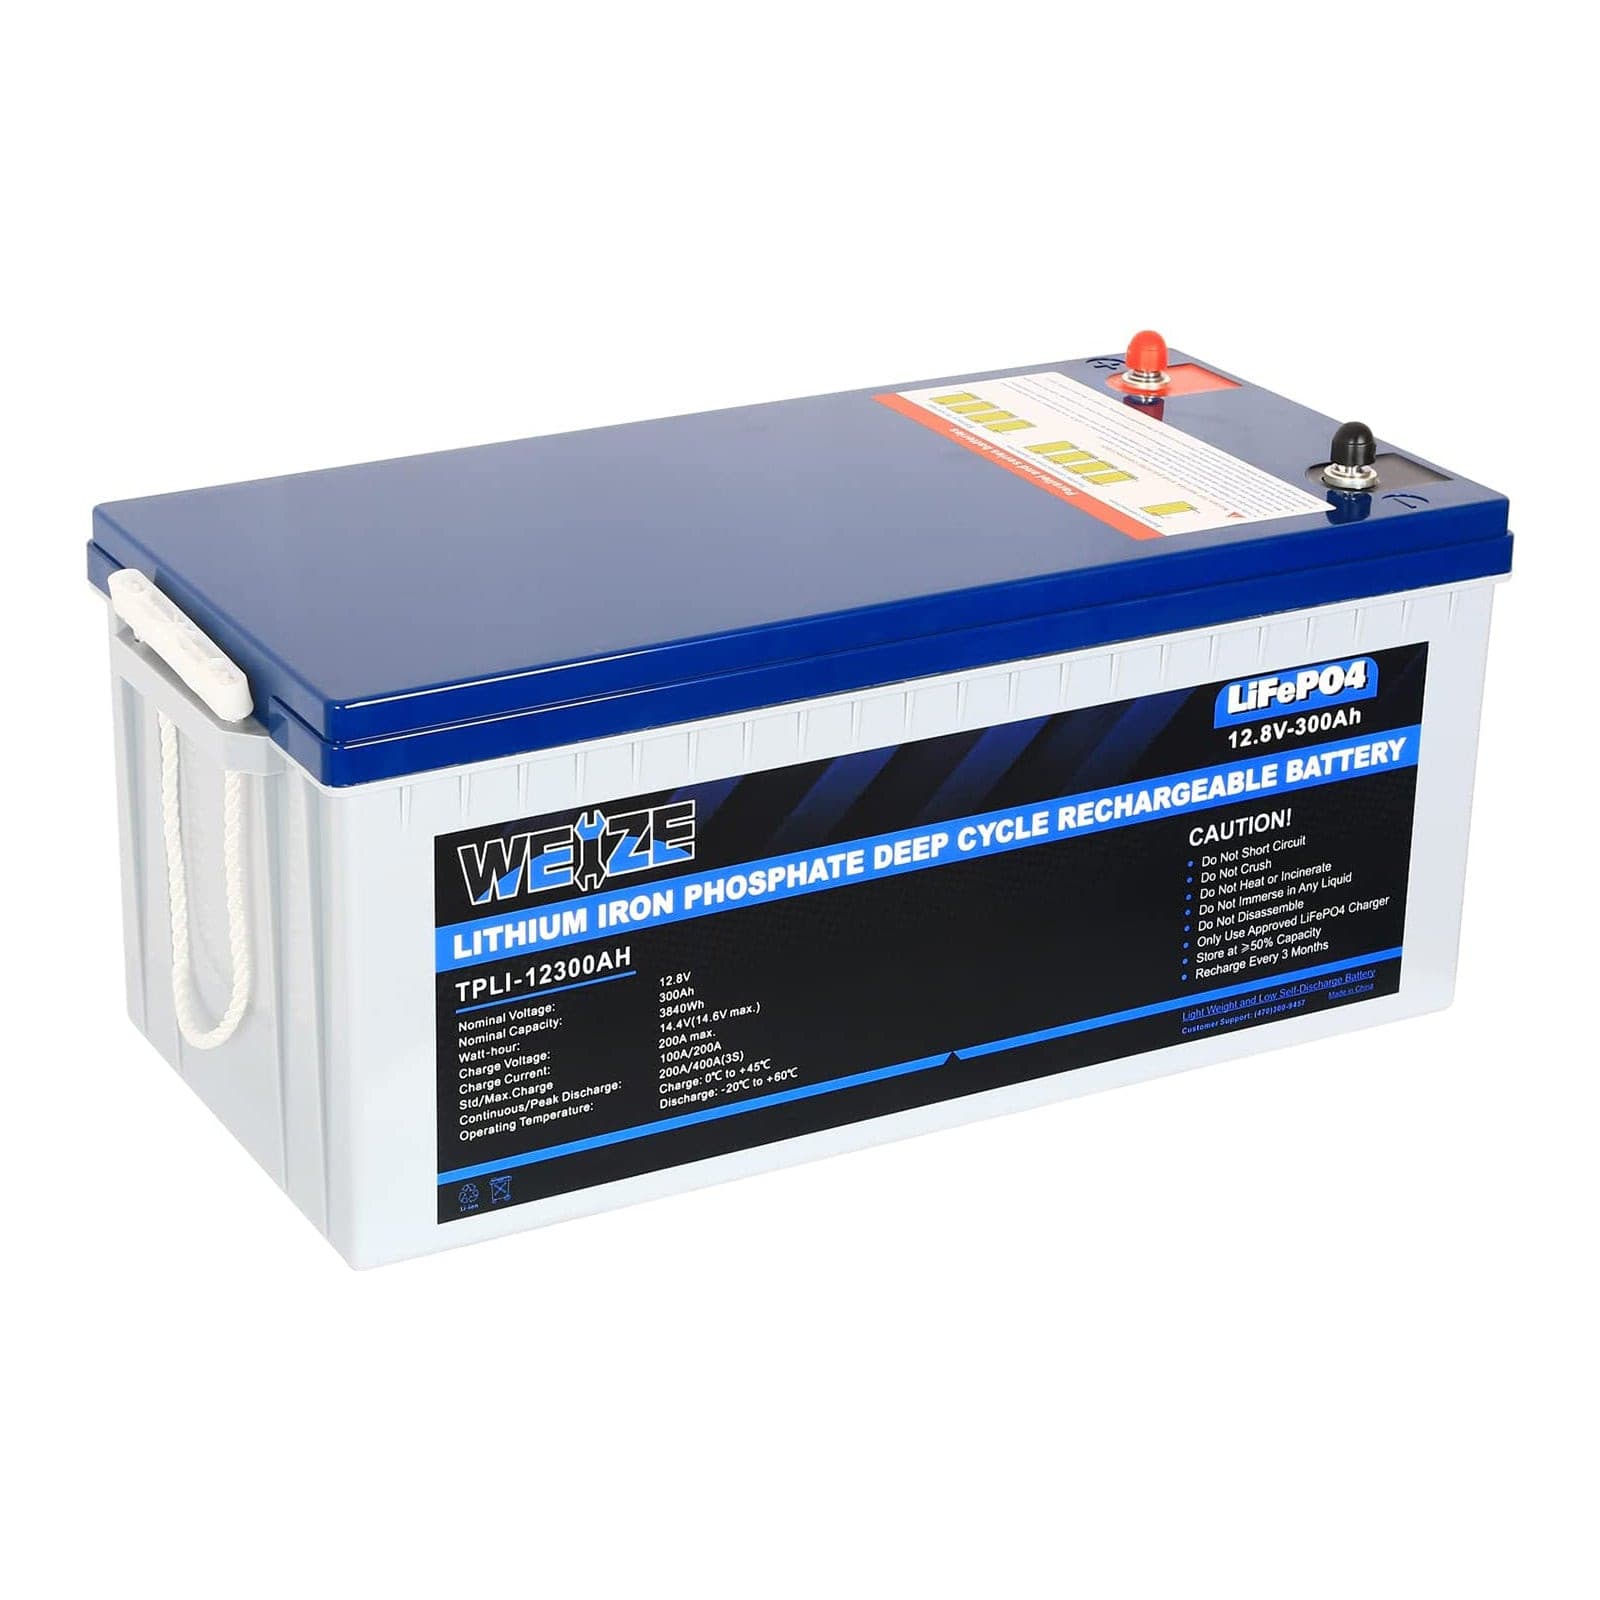 WEIZE 12V 100Ah Mini LiFePO4 Lithium Battery, Built-in 100A Smart BMS